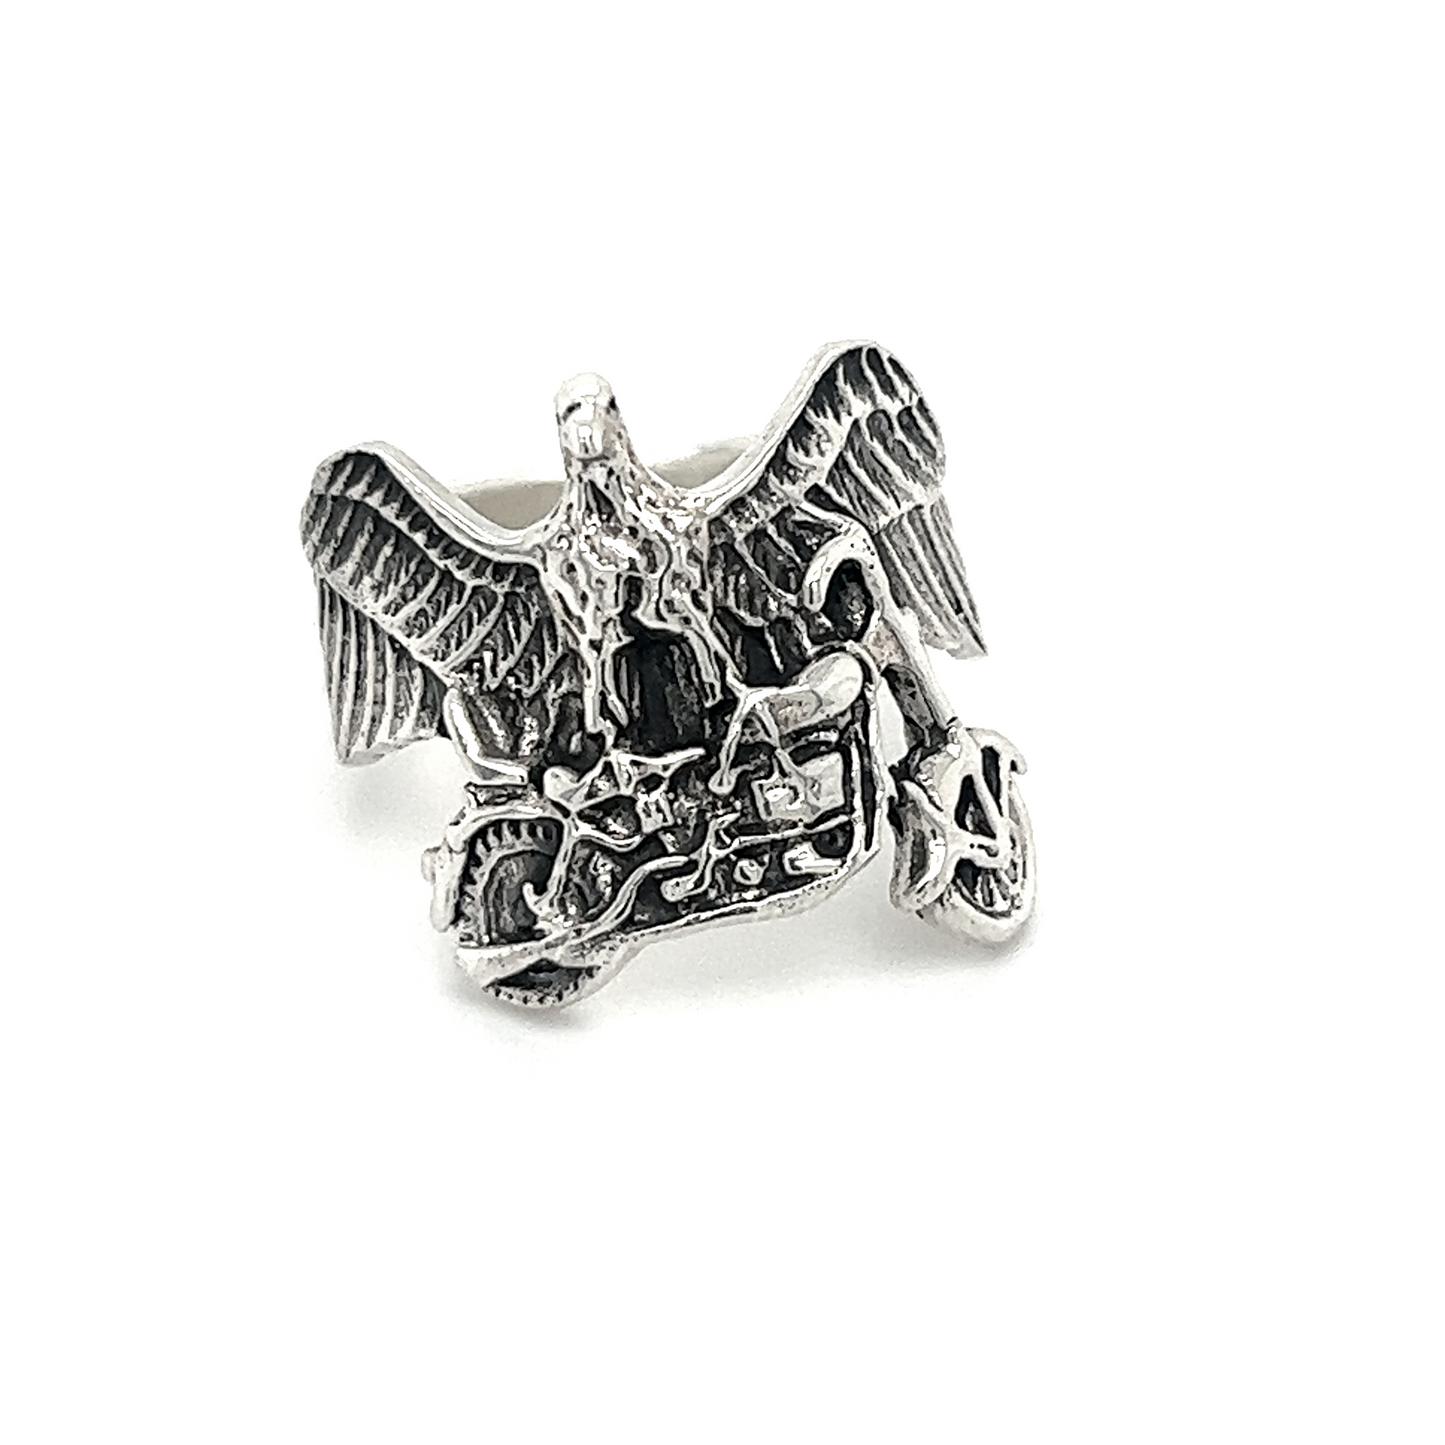 A Super Silver Statement Eagle and Motorcycle Ring featuring an eagle design.